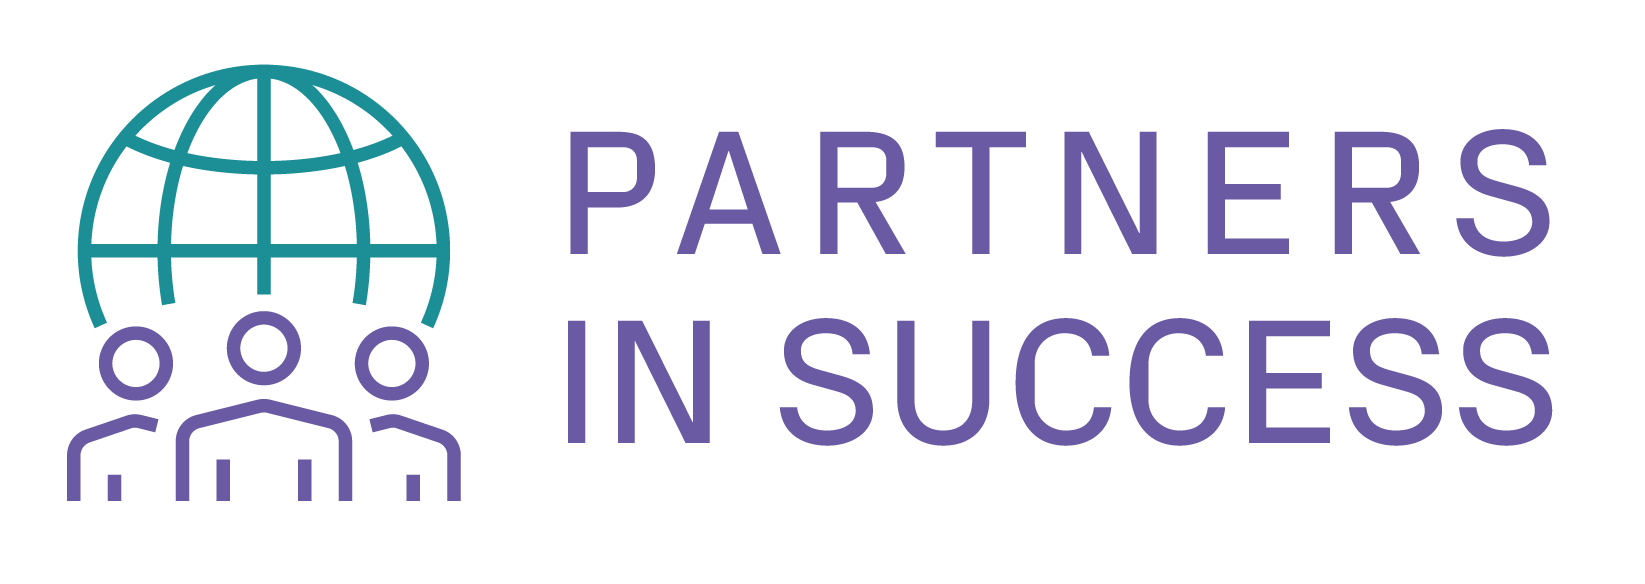 Partners in Success: Global Distributor Sales Conference Malta [March 2023]